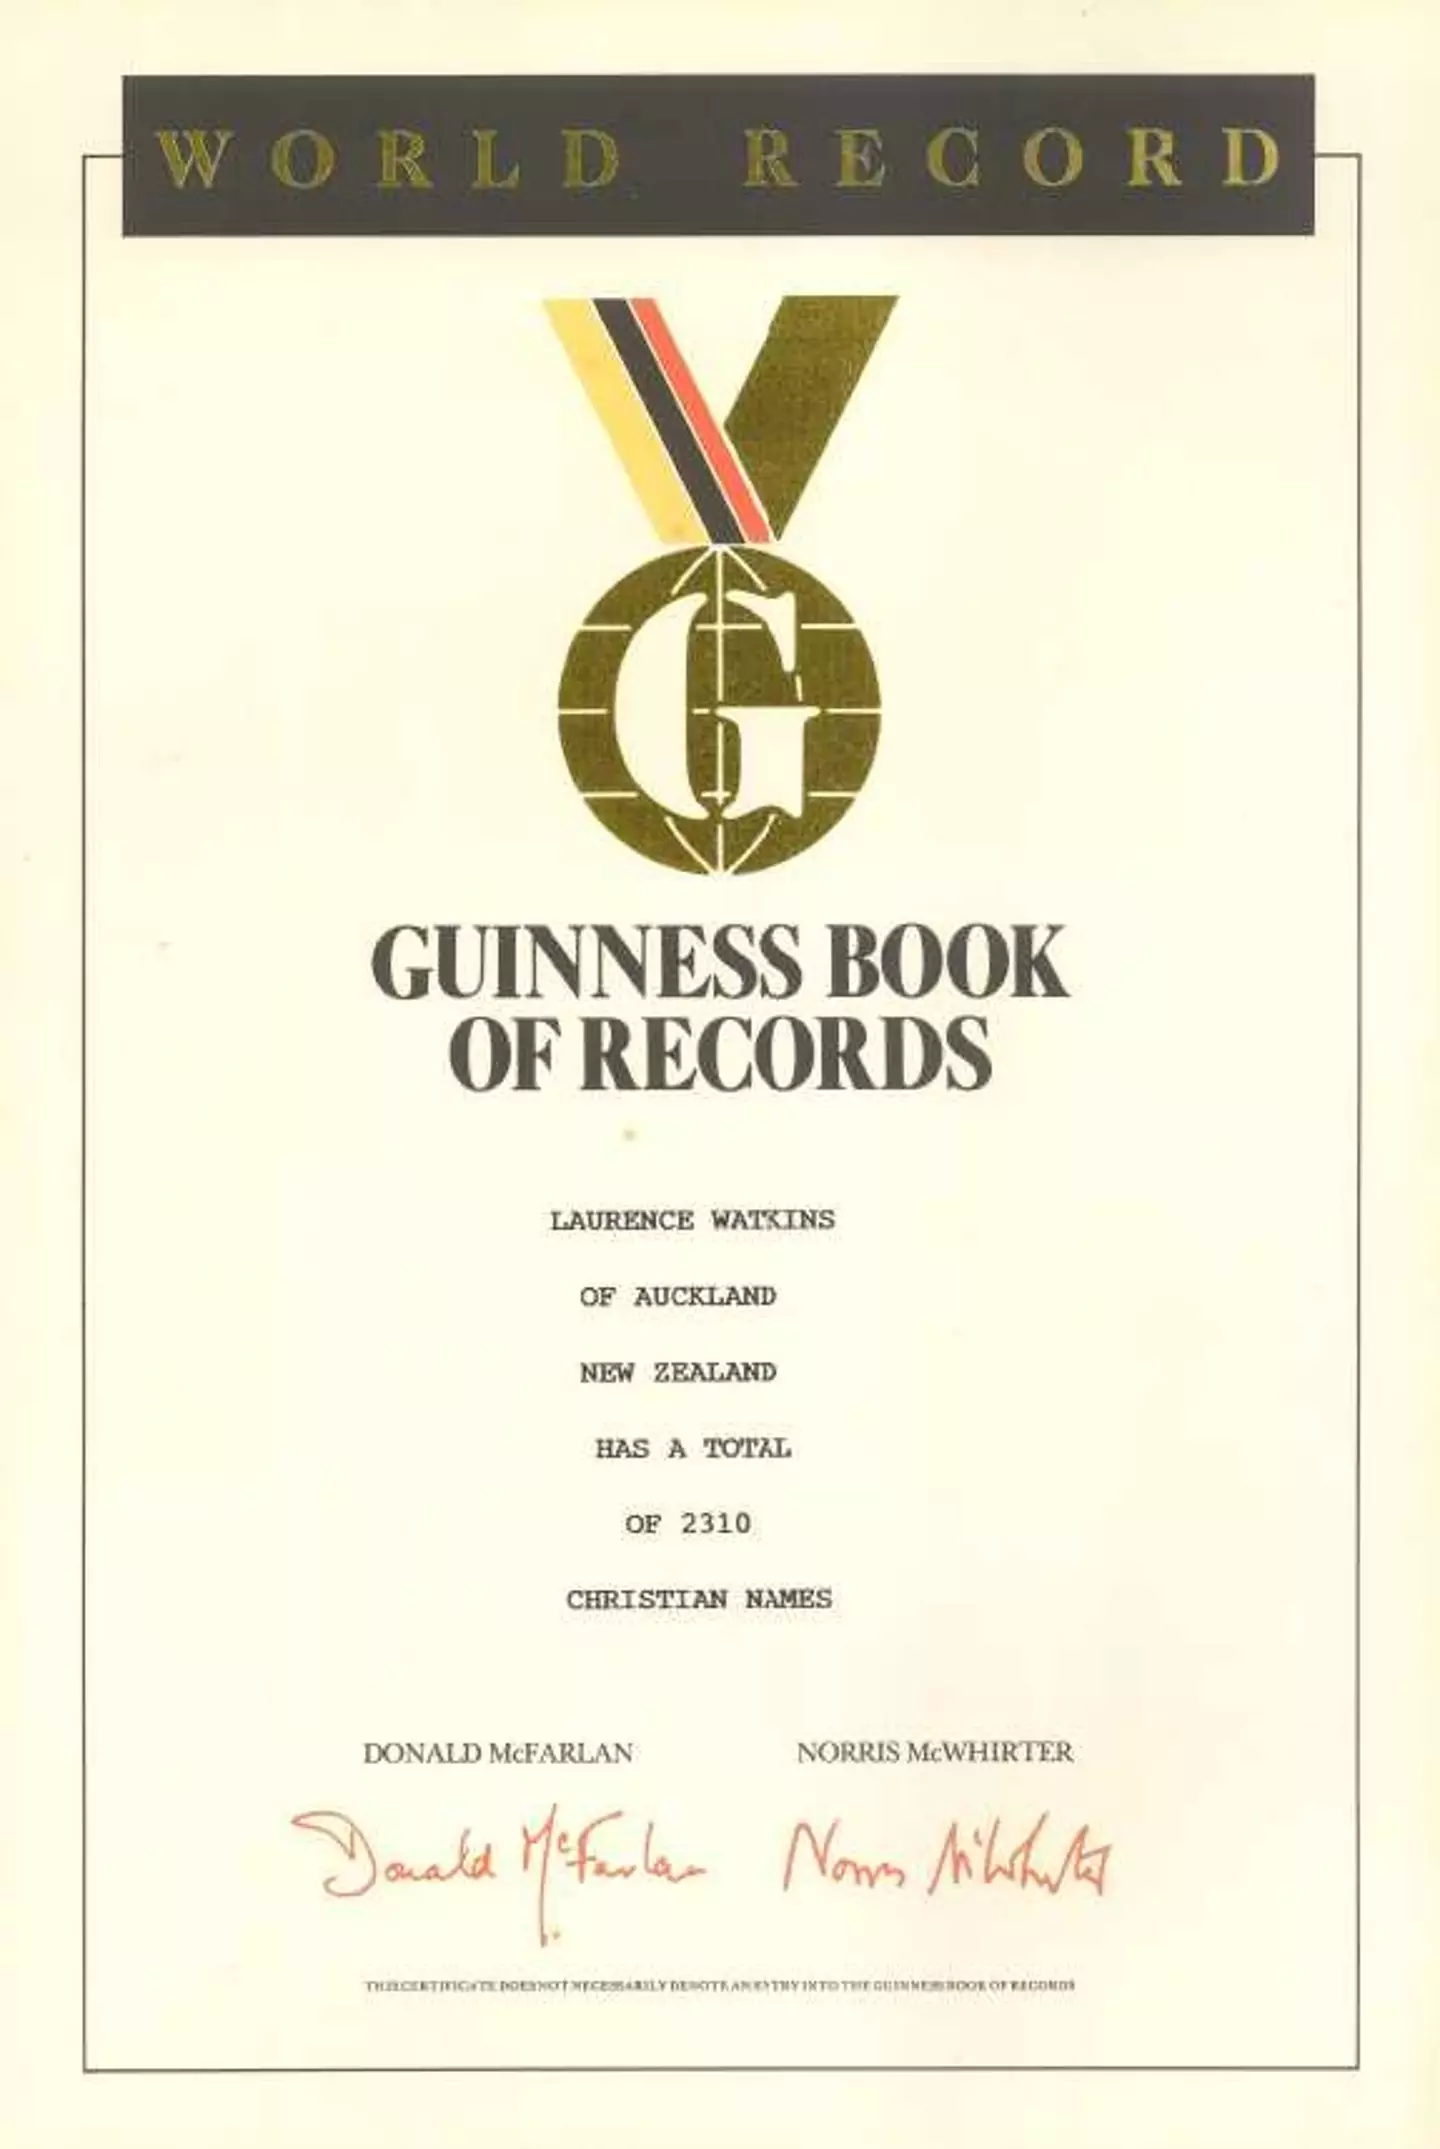 The certificate given to Watkins by the Guinness Book of World Records.